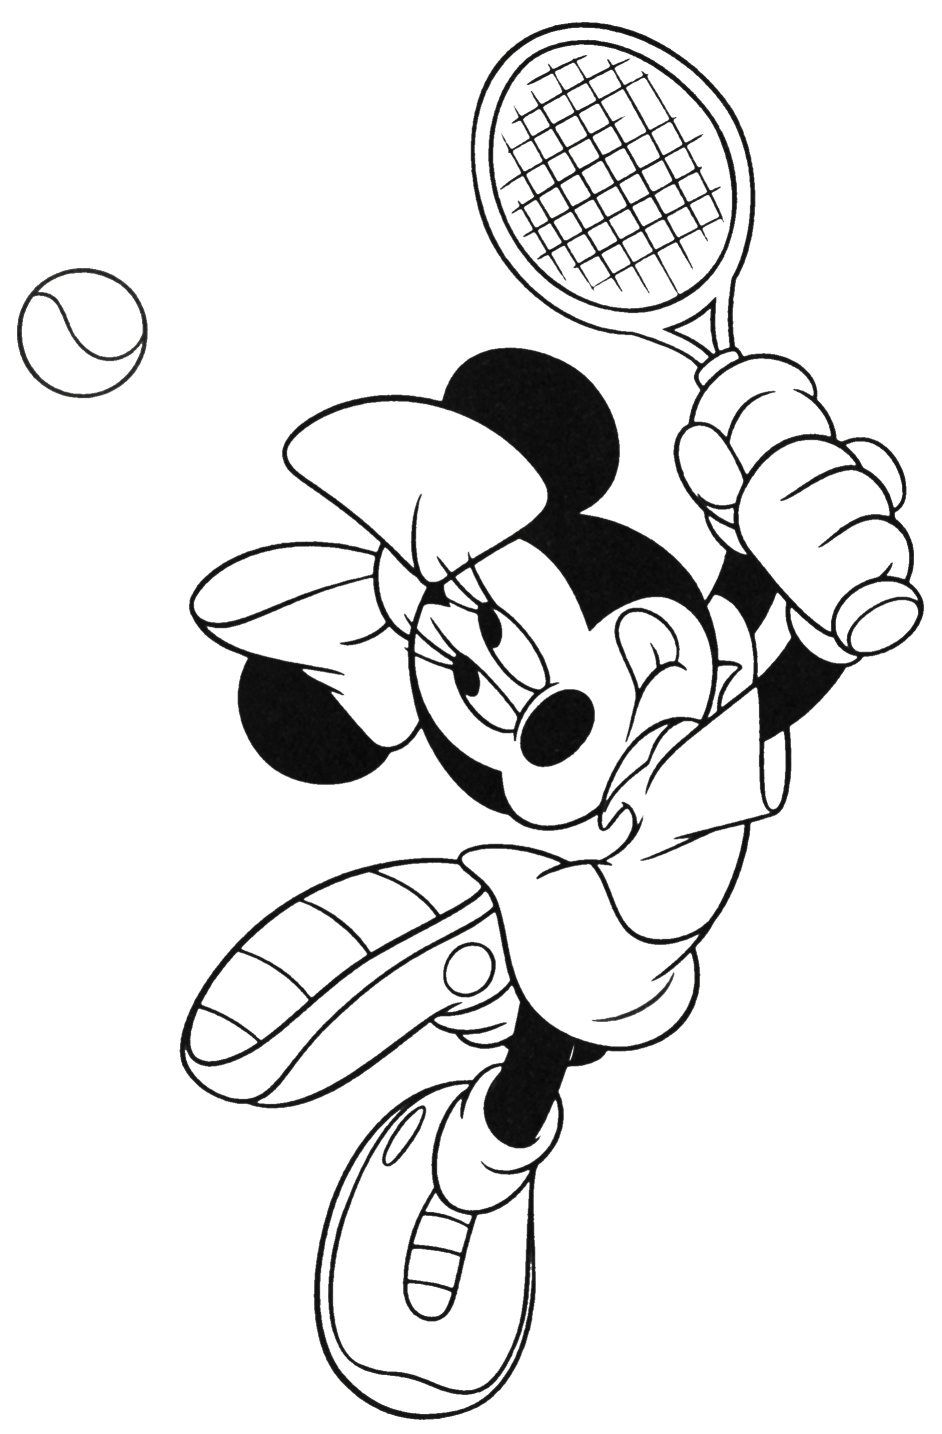 Minnie Mouse Is Good At Tennis Coloring Page